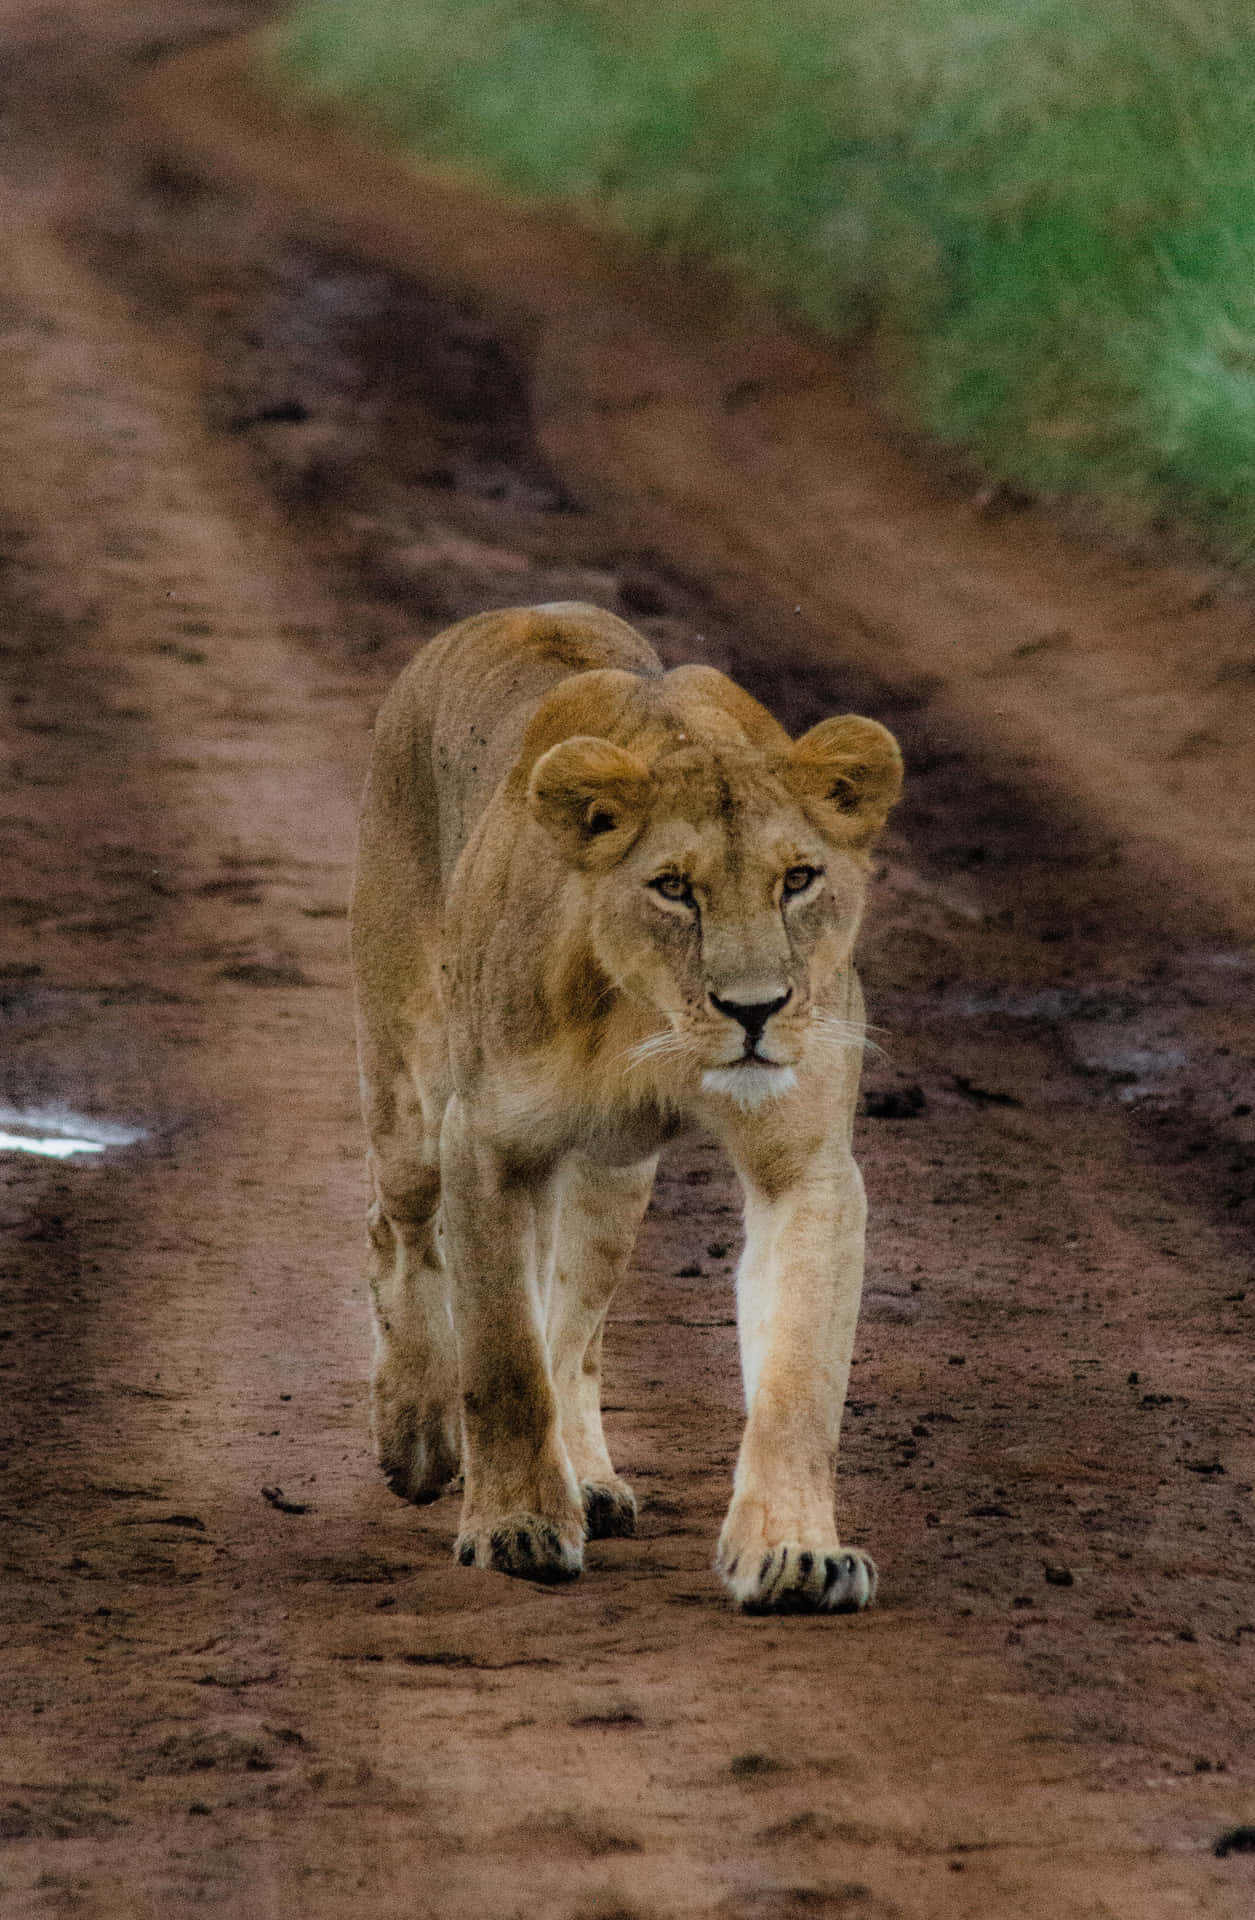 Lioness On A Muddy Road Wallpaper